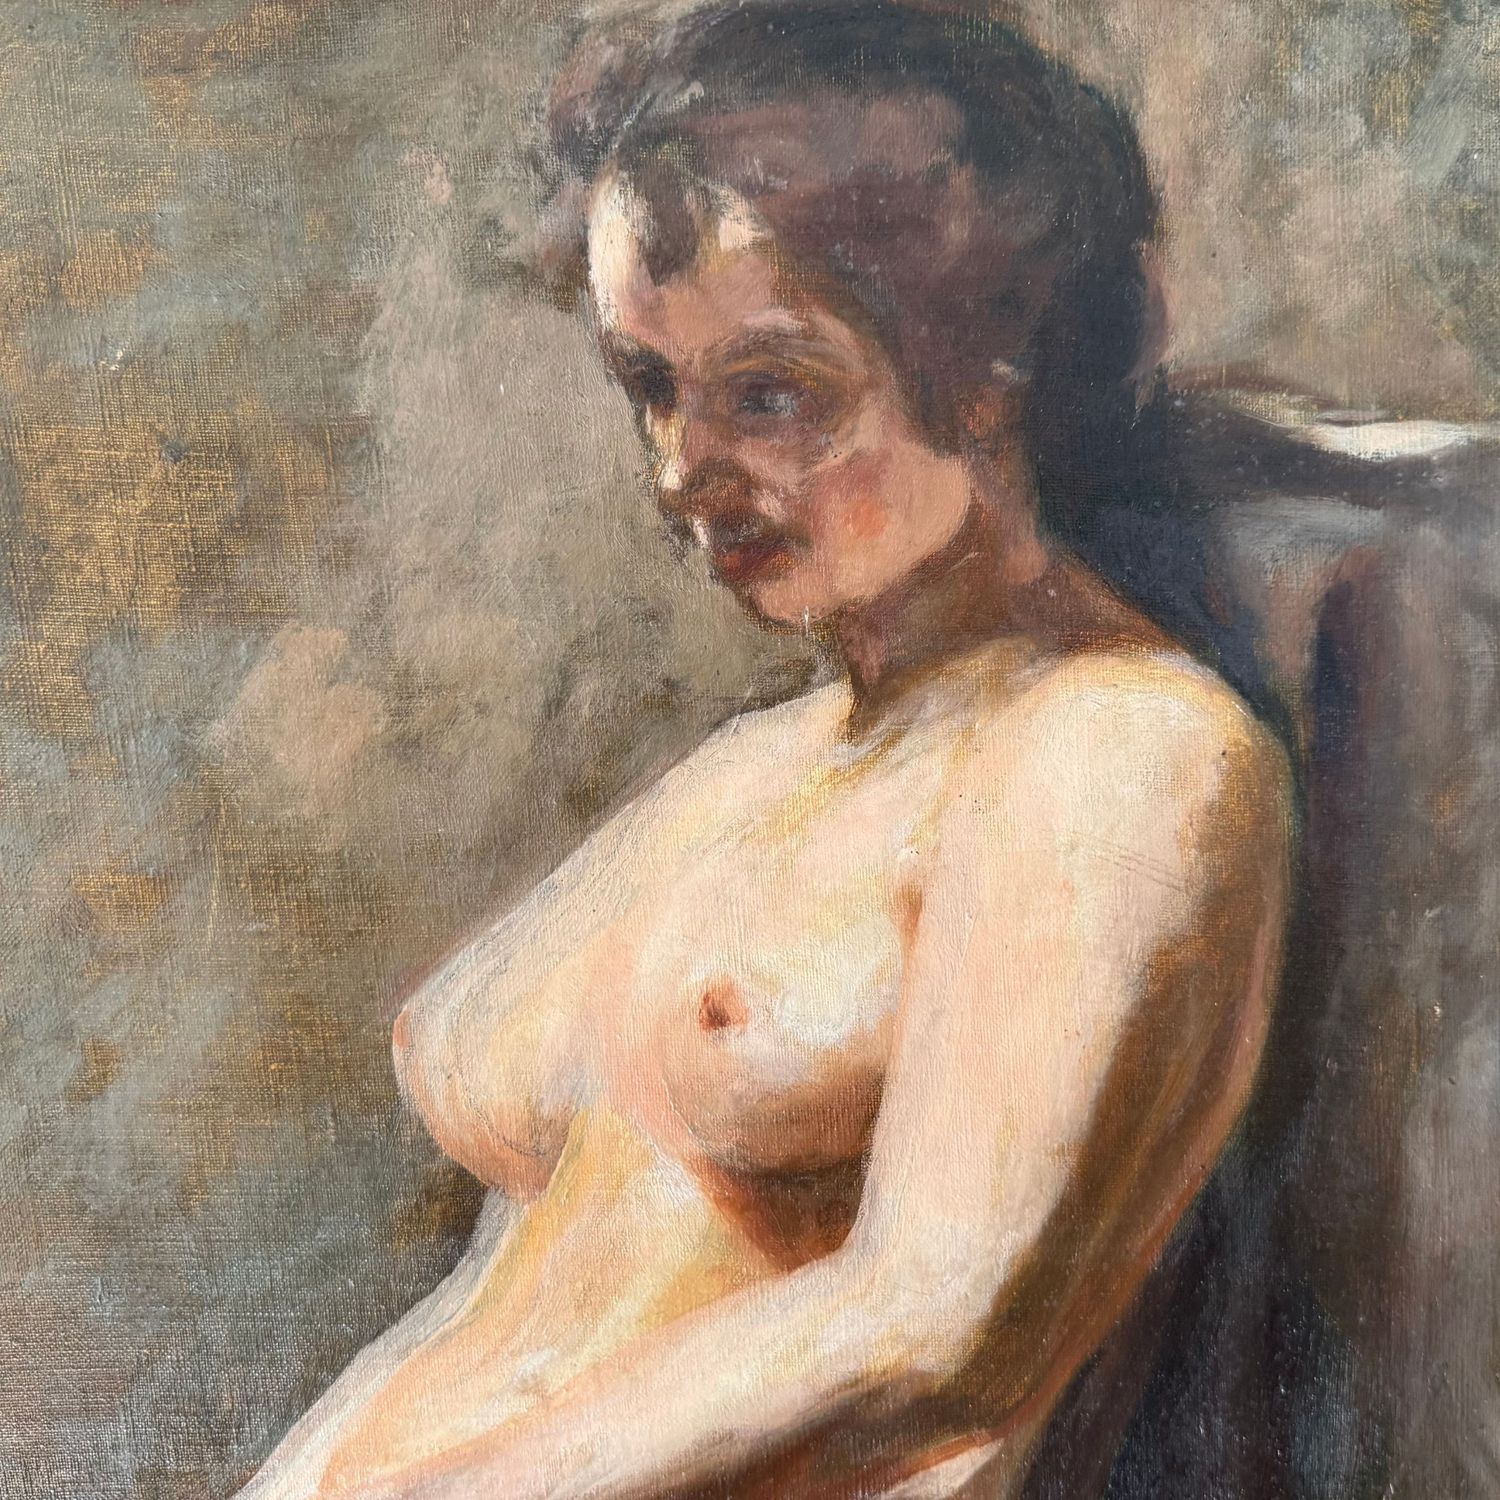 Seated nude woman - Image 2 of 7